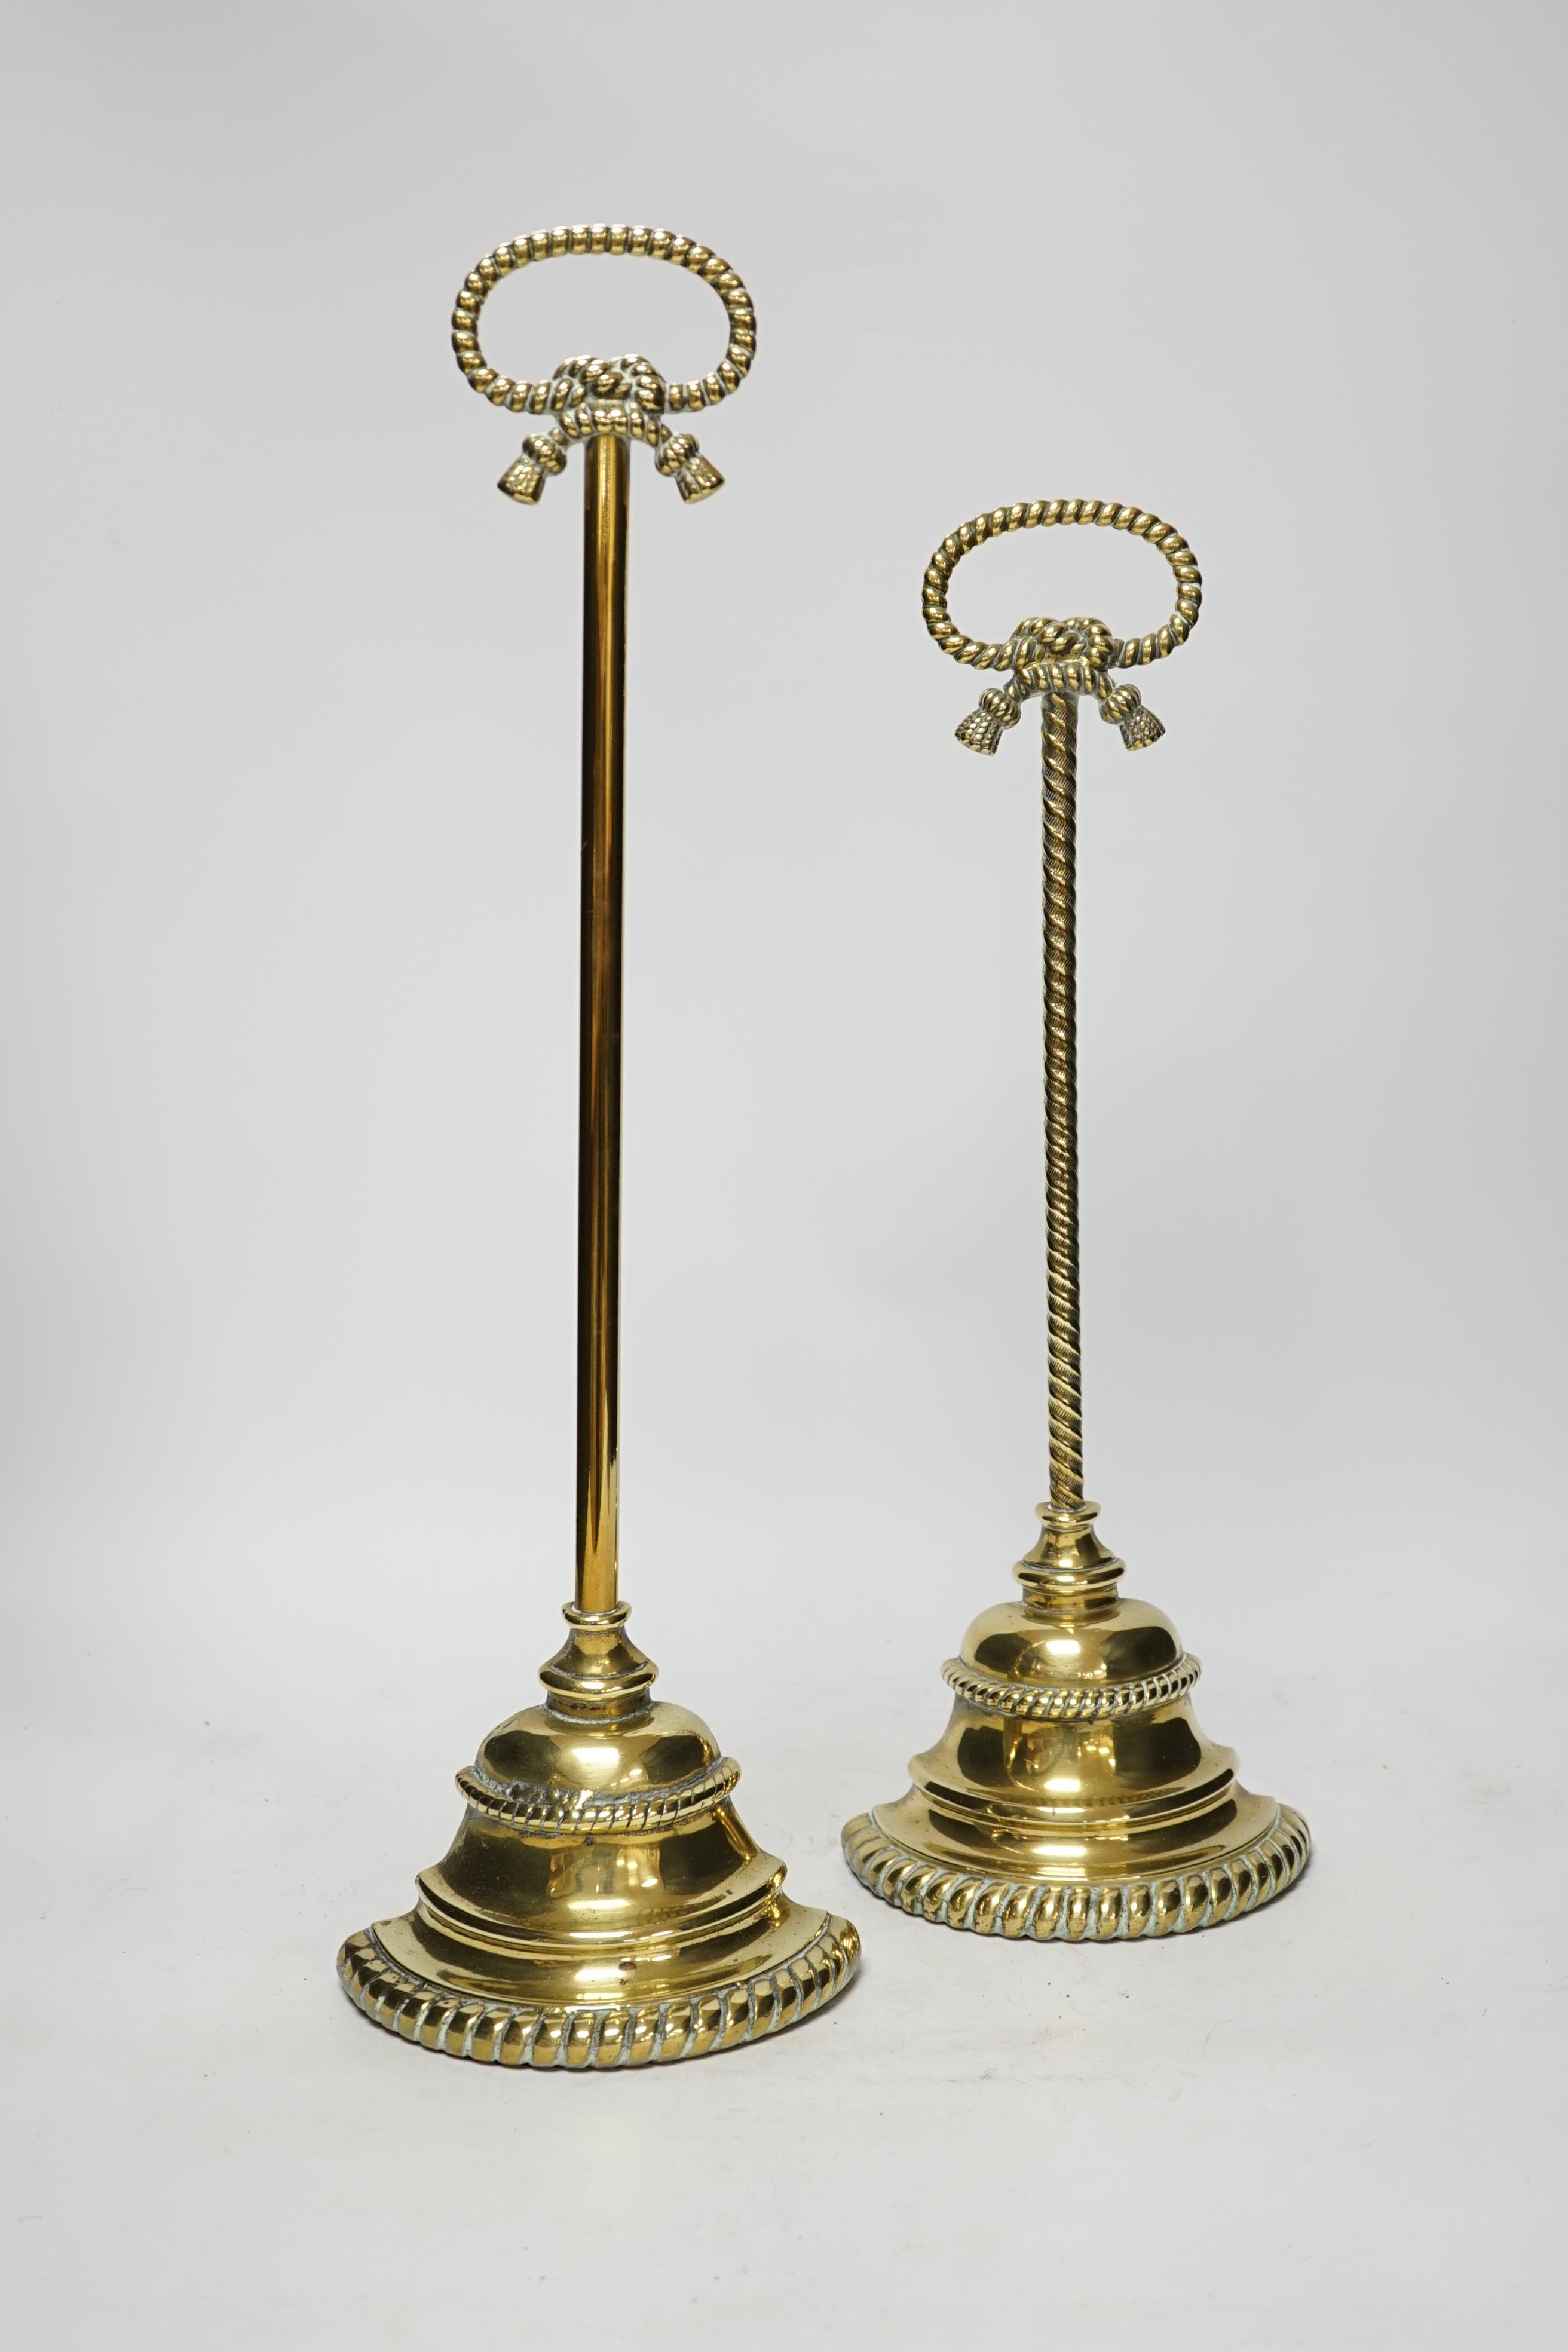 Two early 19th century cast brass door stops, with gadrooned edged plinths, tallest 50cm high